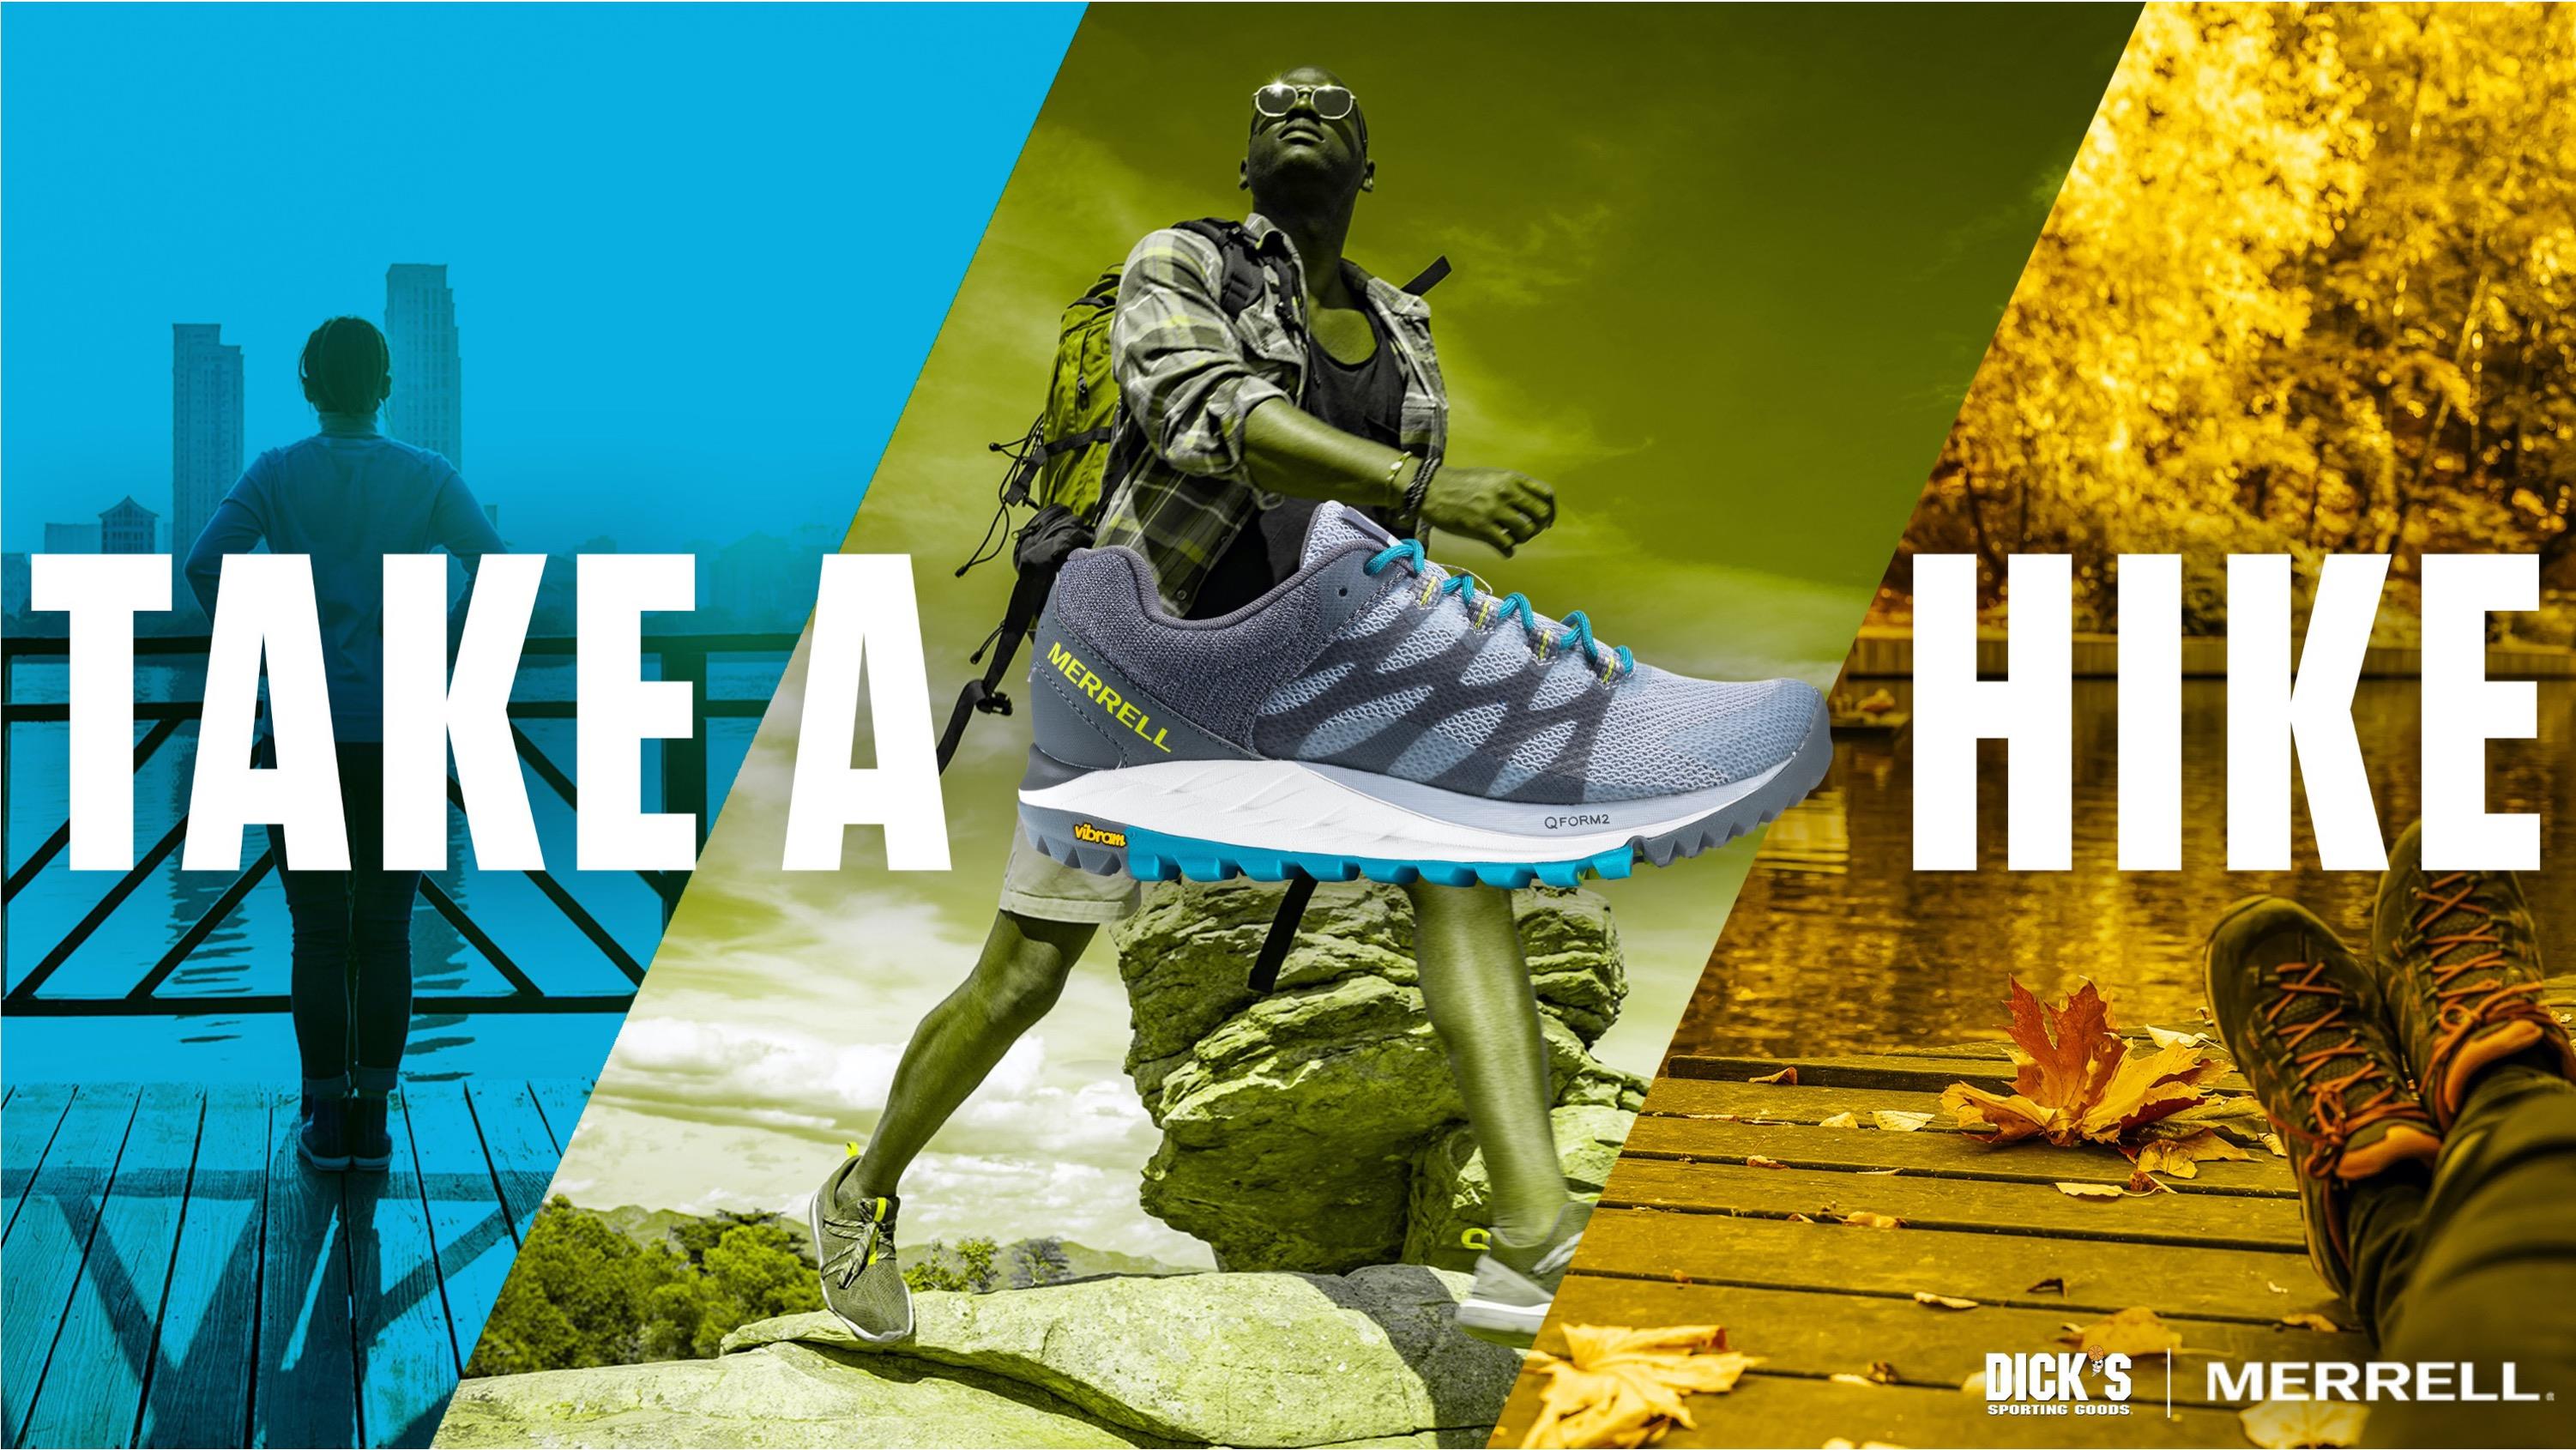 Merrell - Creating a New Category: The Urban Hike